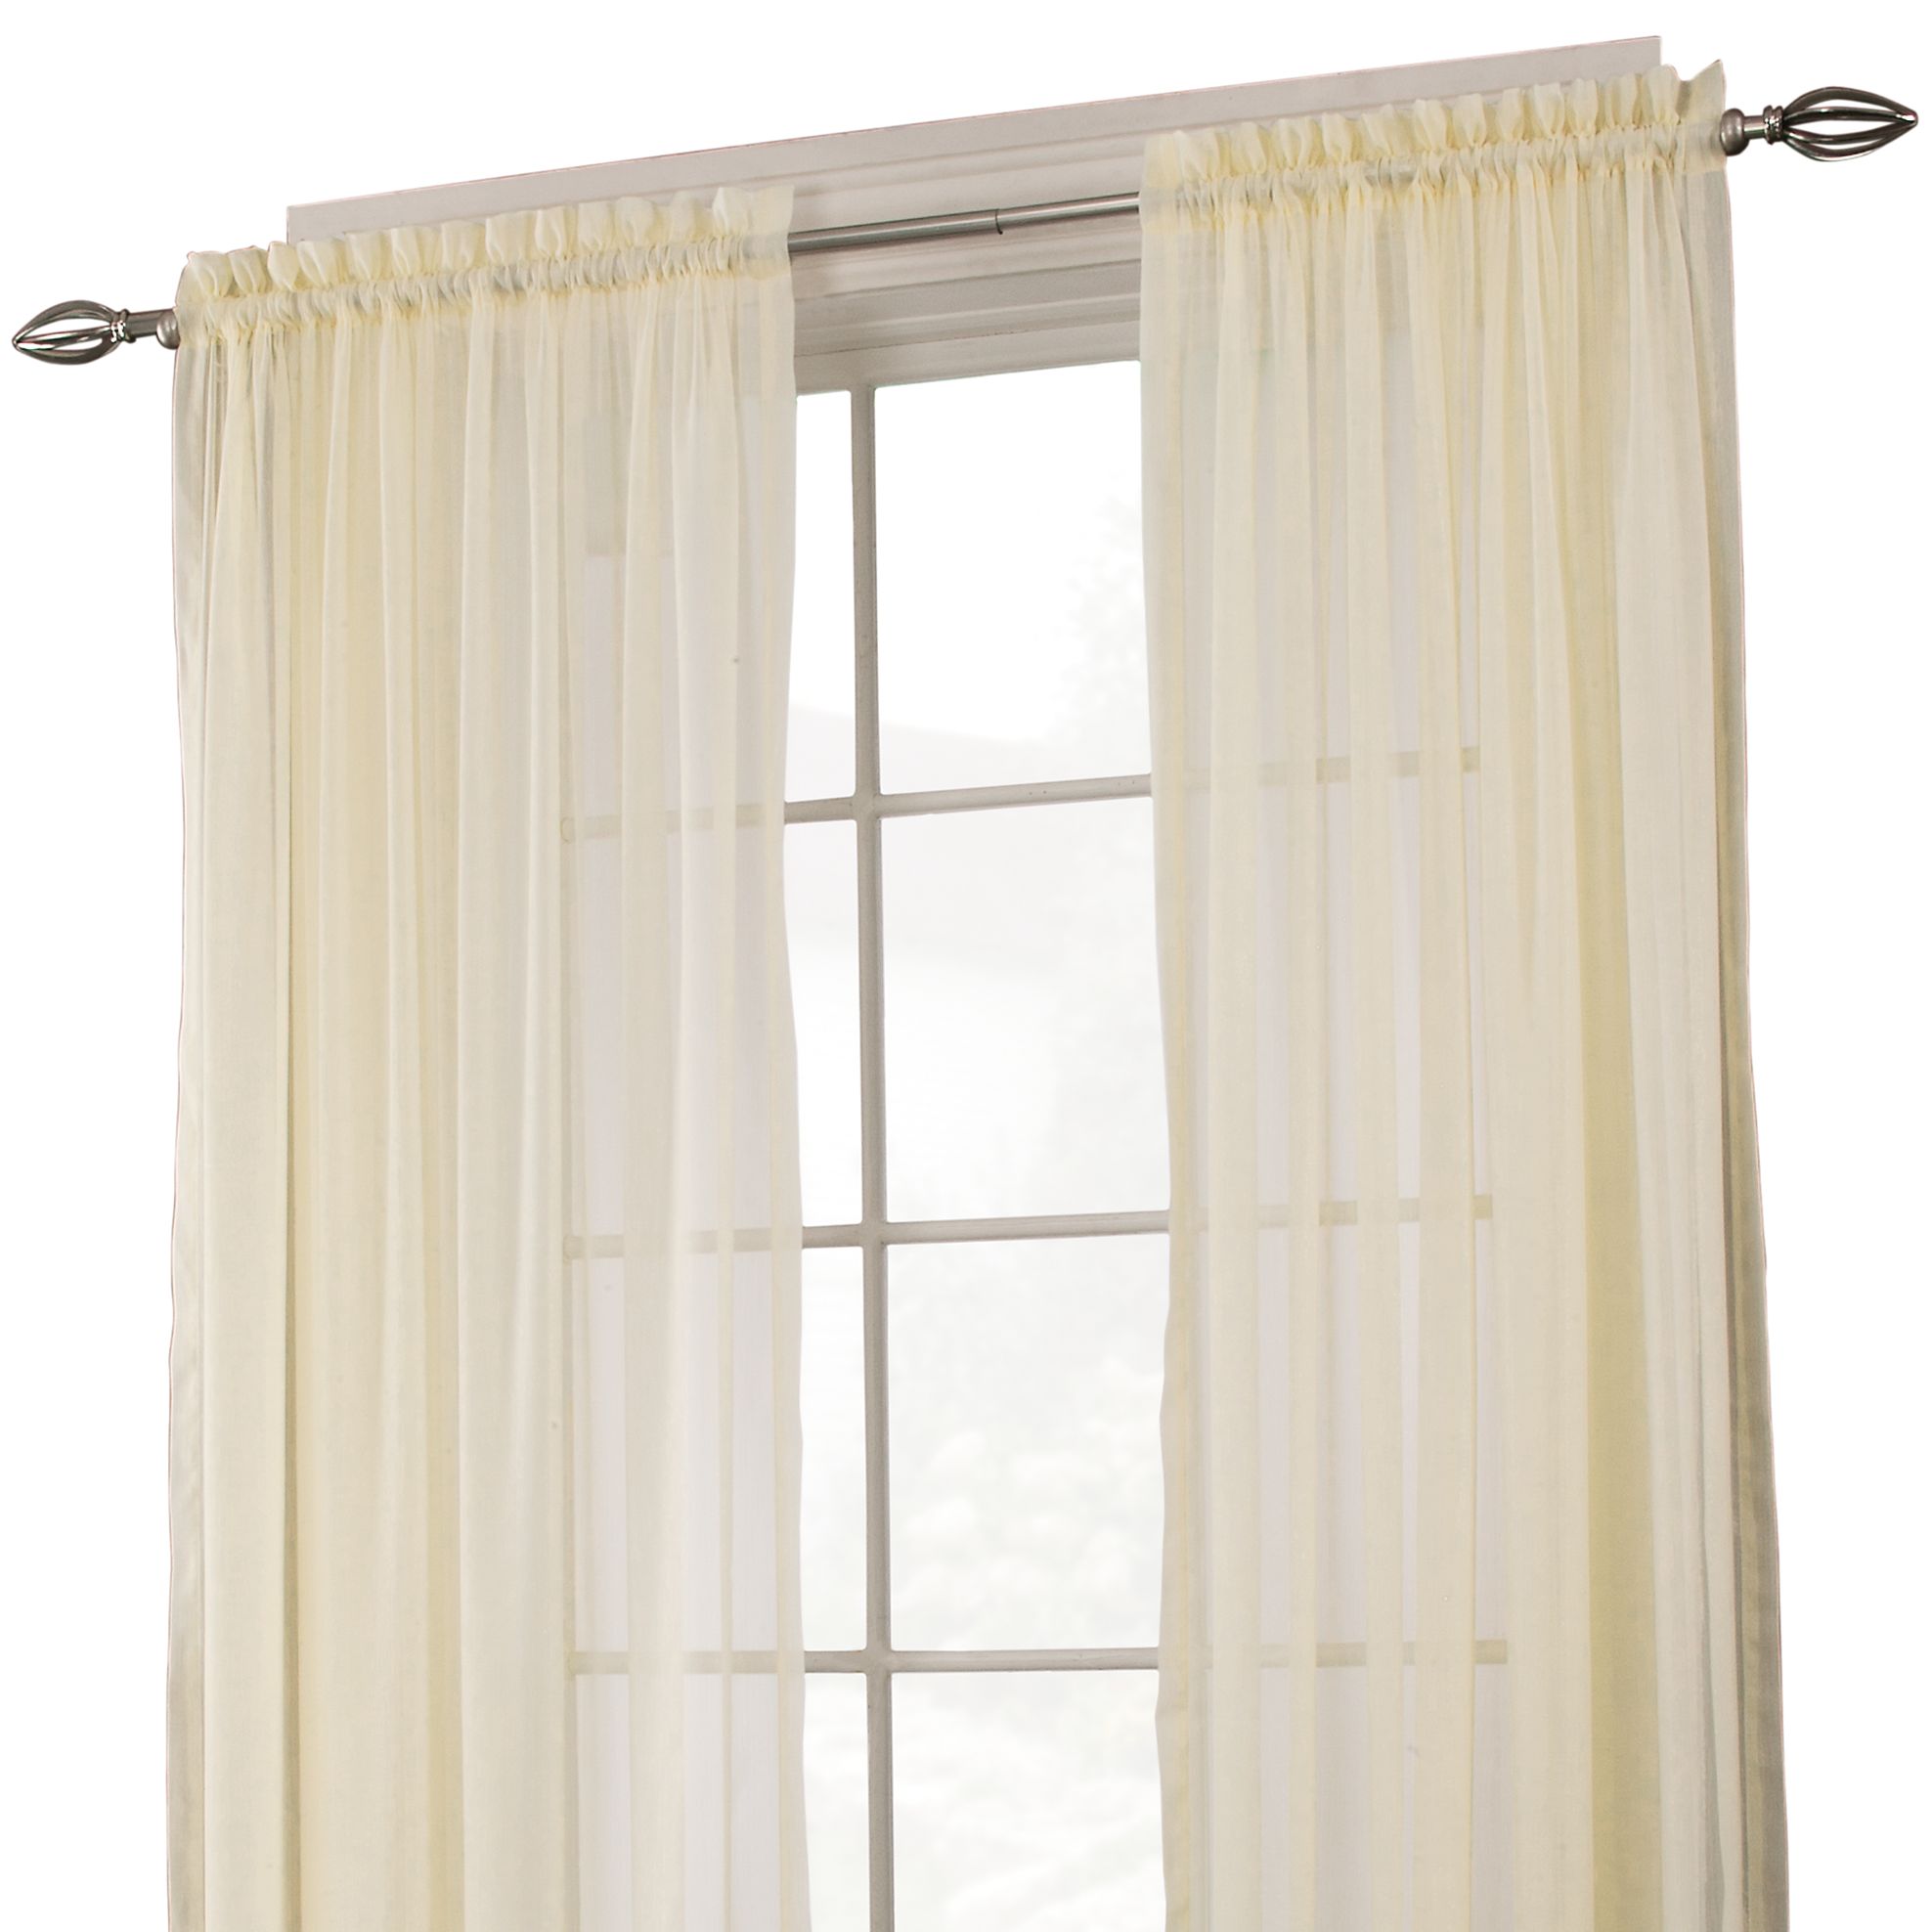 Essential Home Jacquard Textured Sheer Panel - Ivory